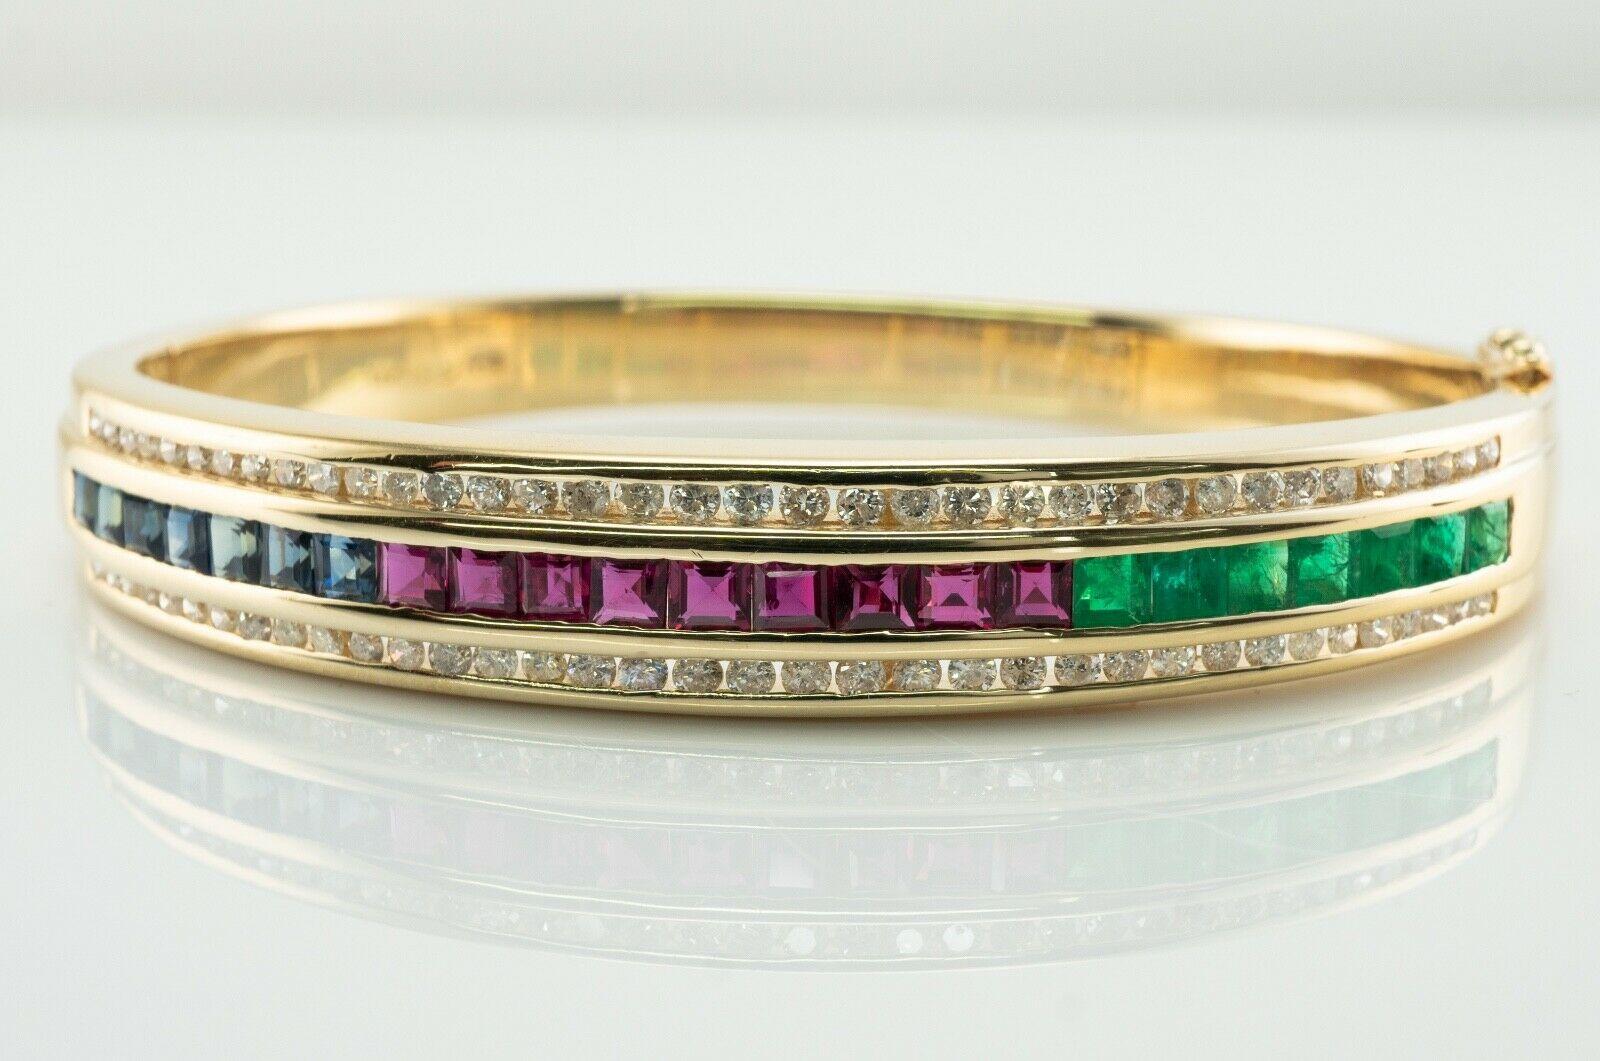 This amazing estate bracelet is finely crafted in solid 14K Yellow Gold and set with genuine Earth mined Emeralds, Rubies, Sapphires and Diamonds. There are 7 channel set emeralds, 9 Rubies, and seven sapphires. These gems are amazing quality, they